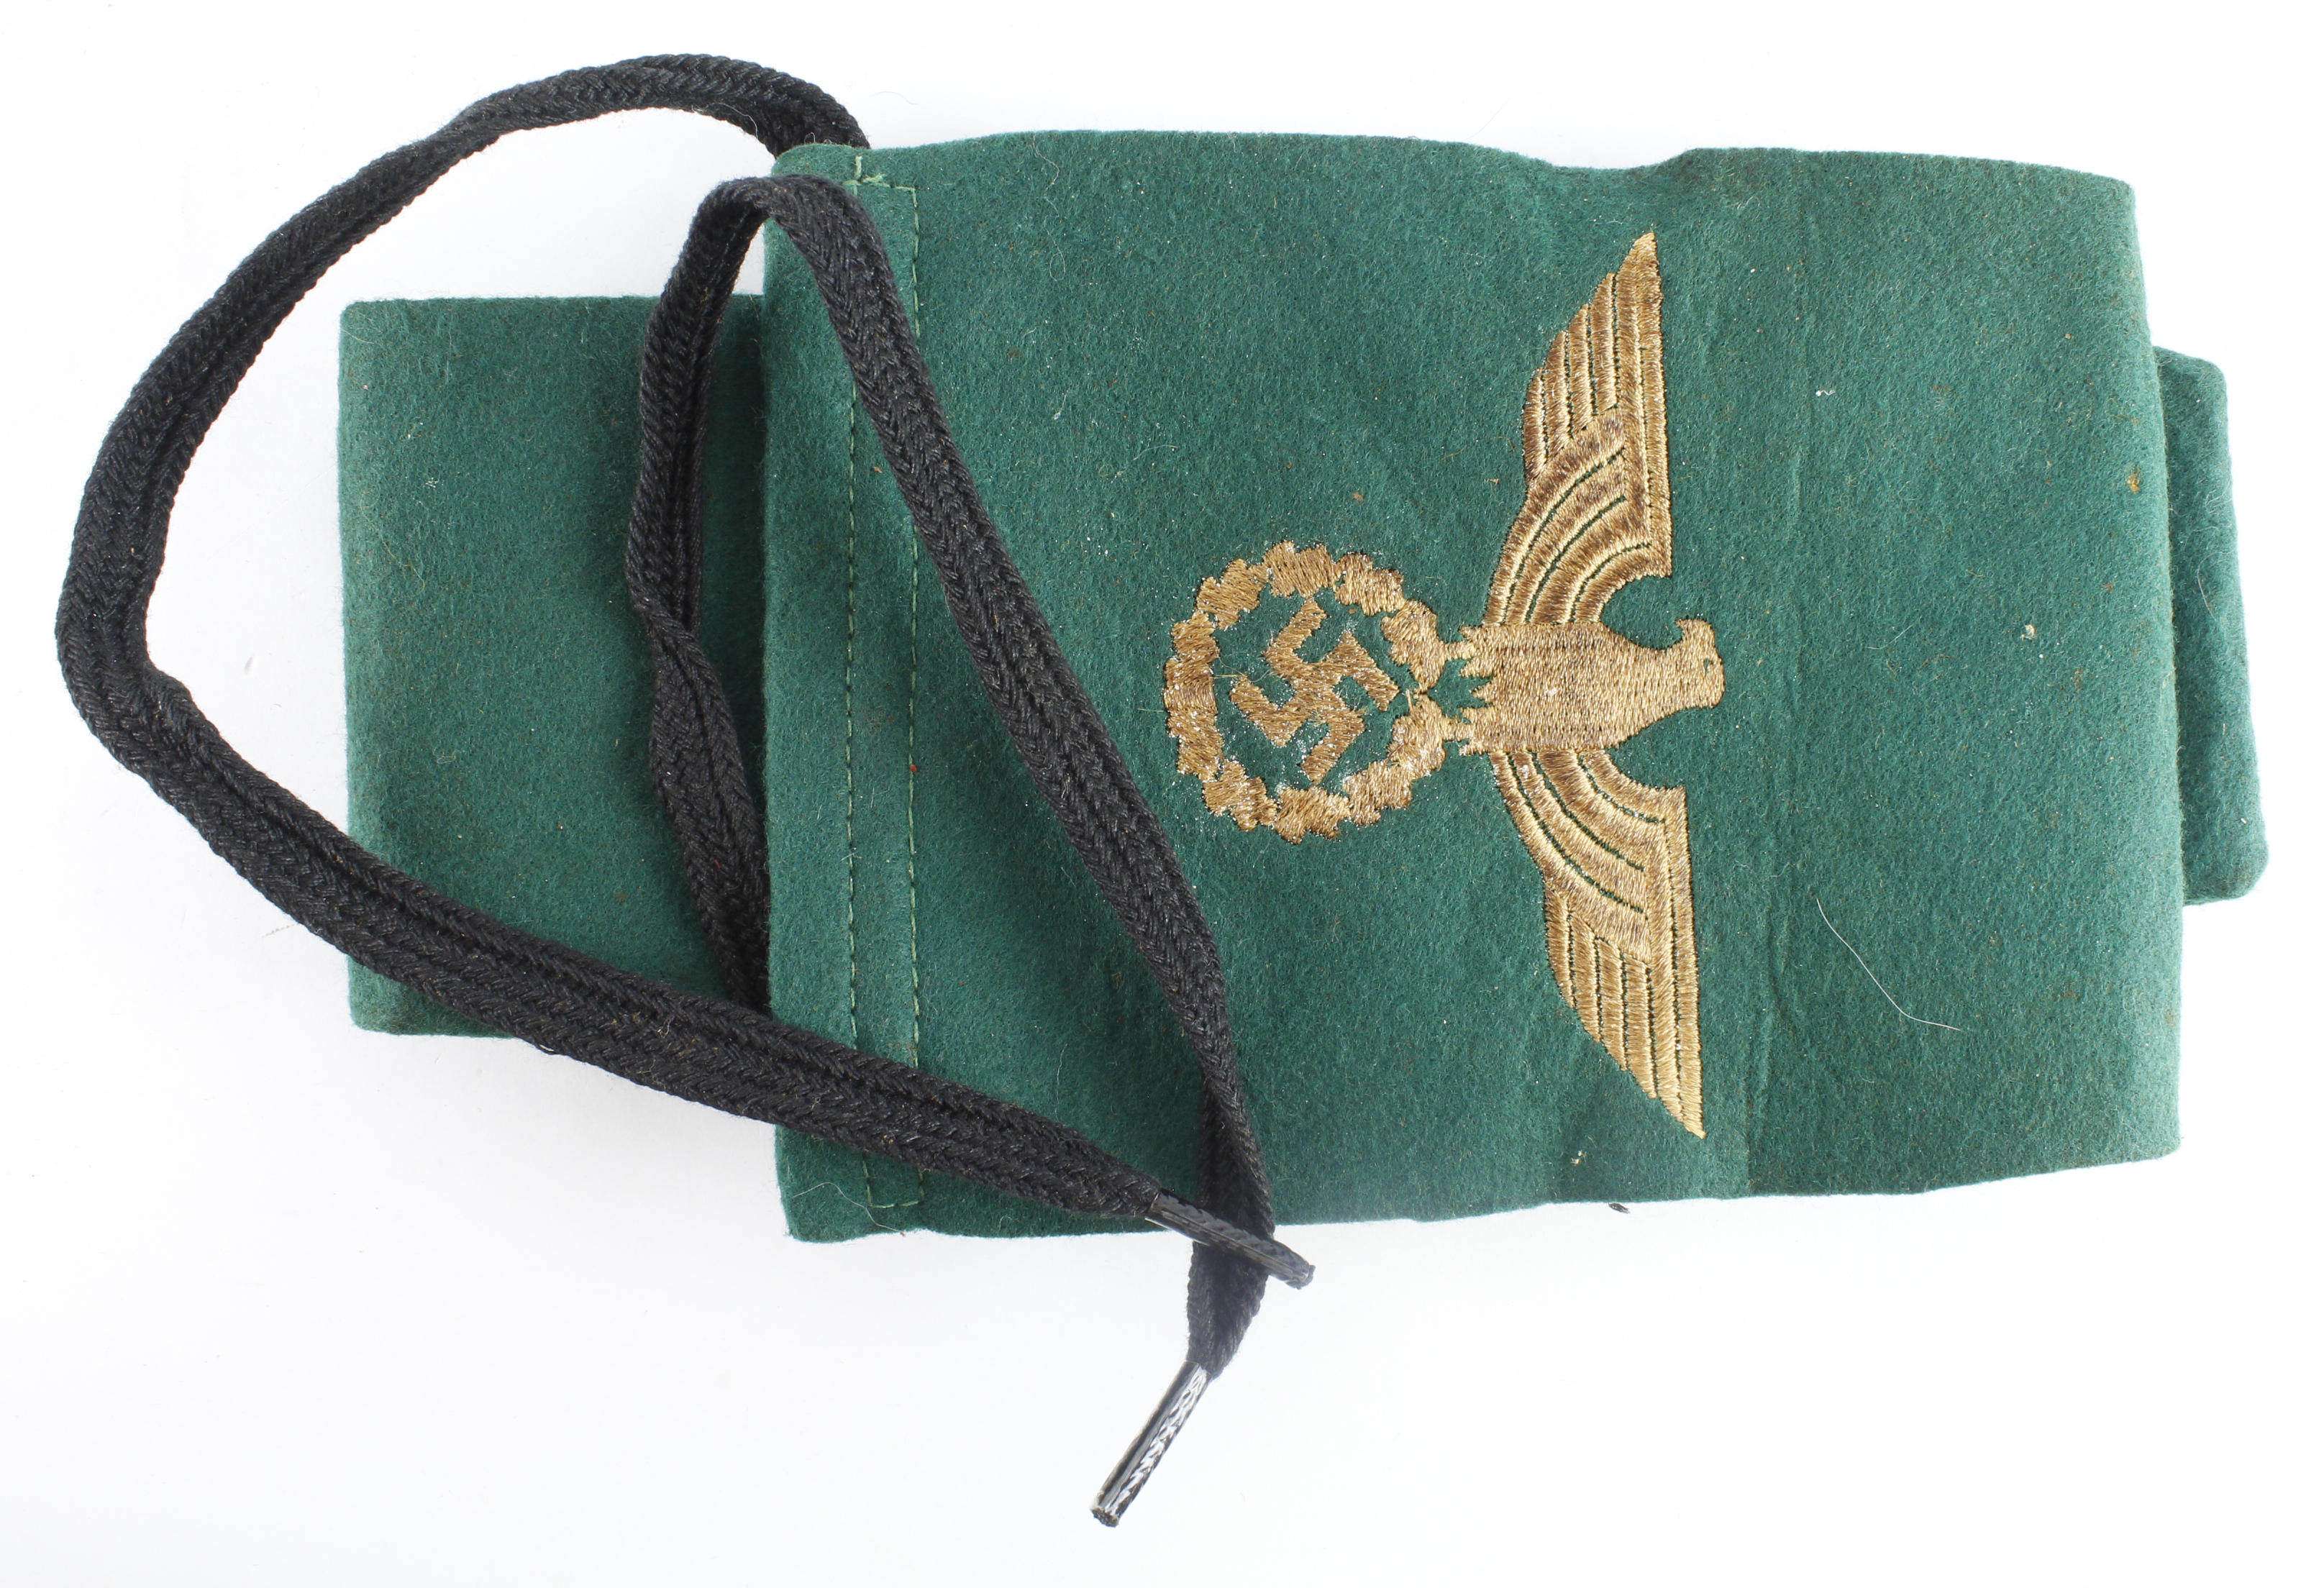 German Wehrmacht Officers dagger bag, green cloth with eagle stitched to flap.